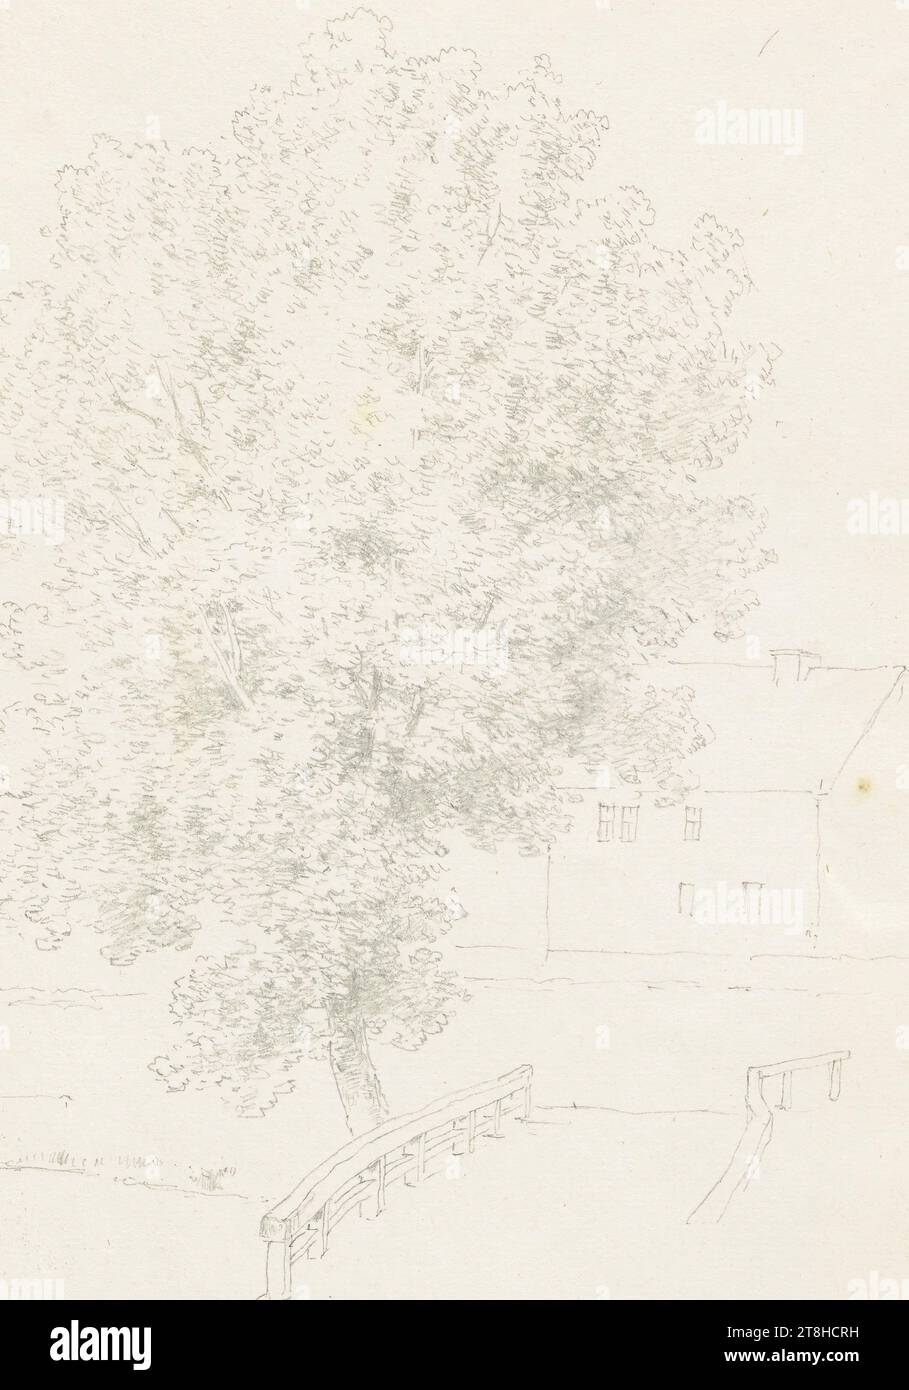 CARL THEODOR REIFFENSTEIN, tree next to a bridge, August 3, 1880, sheet, 132 x 94 mm, pencil on paper, tree next to a bridge, CARL THEODOR REIFFENSTEIN, page, adhesive tapes, volume 36, page 49, part number / total, 2 / 3, BAD SALZSCHLIRFUmkreis, 19TH CENTURY, DRAWING, pencil on paper, GRAPHITE-CLAY MIXTURE, PAPER, PENCIL DRAWING, GERMAN, TREE STUDY, ARCHITECTURAL STUDY, TRAVEL STUDY, STUDY, Dated and inscribed lower right, in pencil, Salzschlirf 3 Aug 1880., Numbered on the page above the drawing, with pen in black Stock Photo